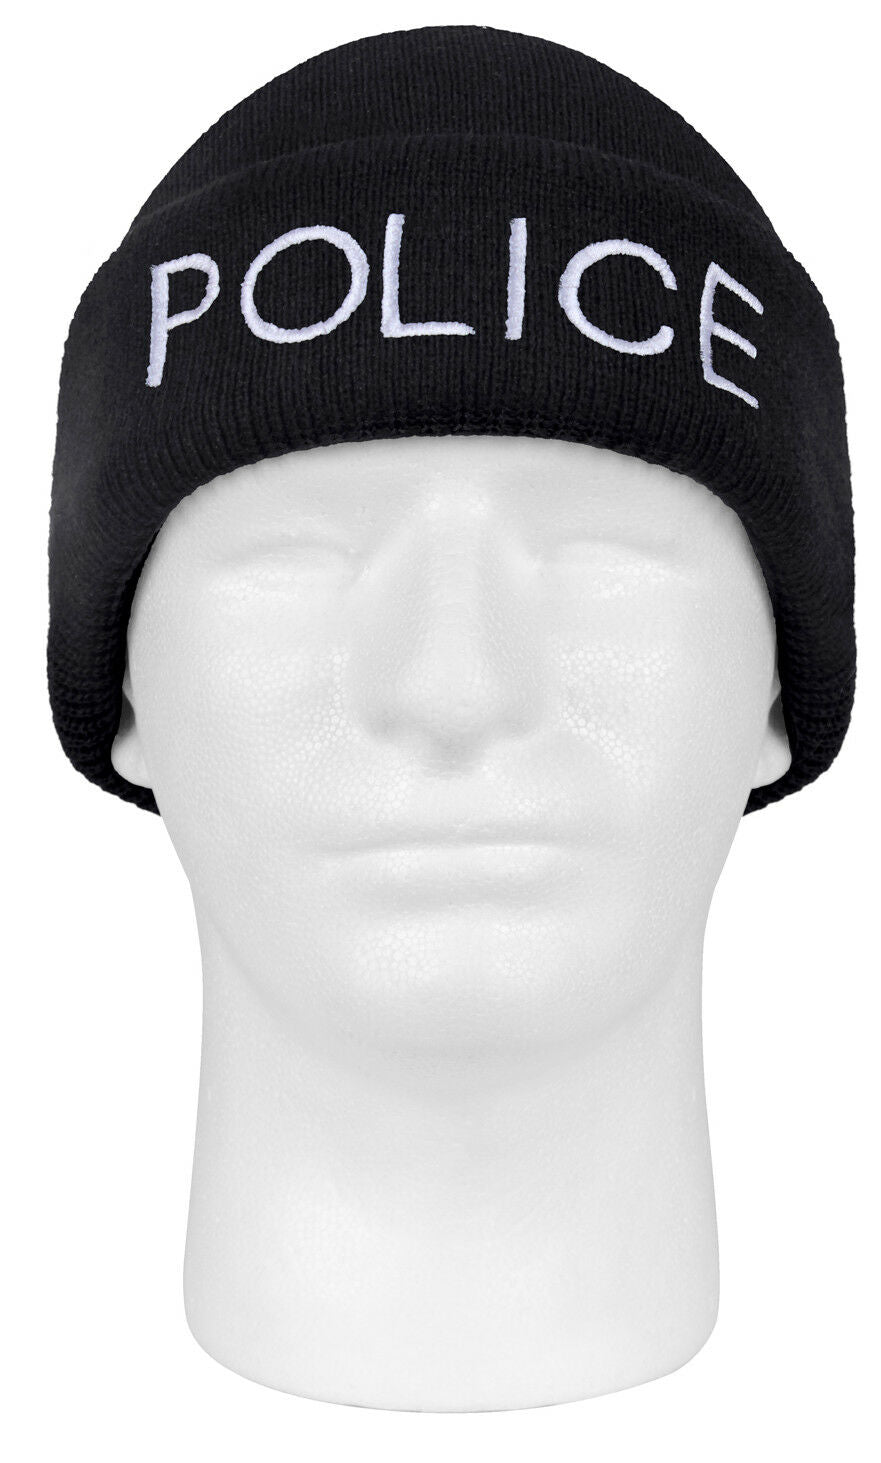 watch cap winter hat police embroidery black acrylic knit beanie rothco 5443